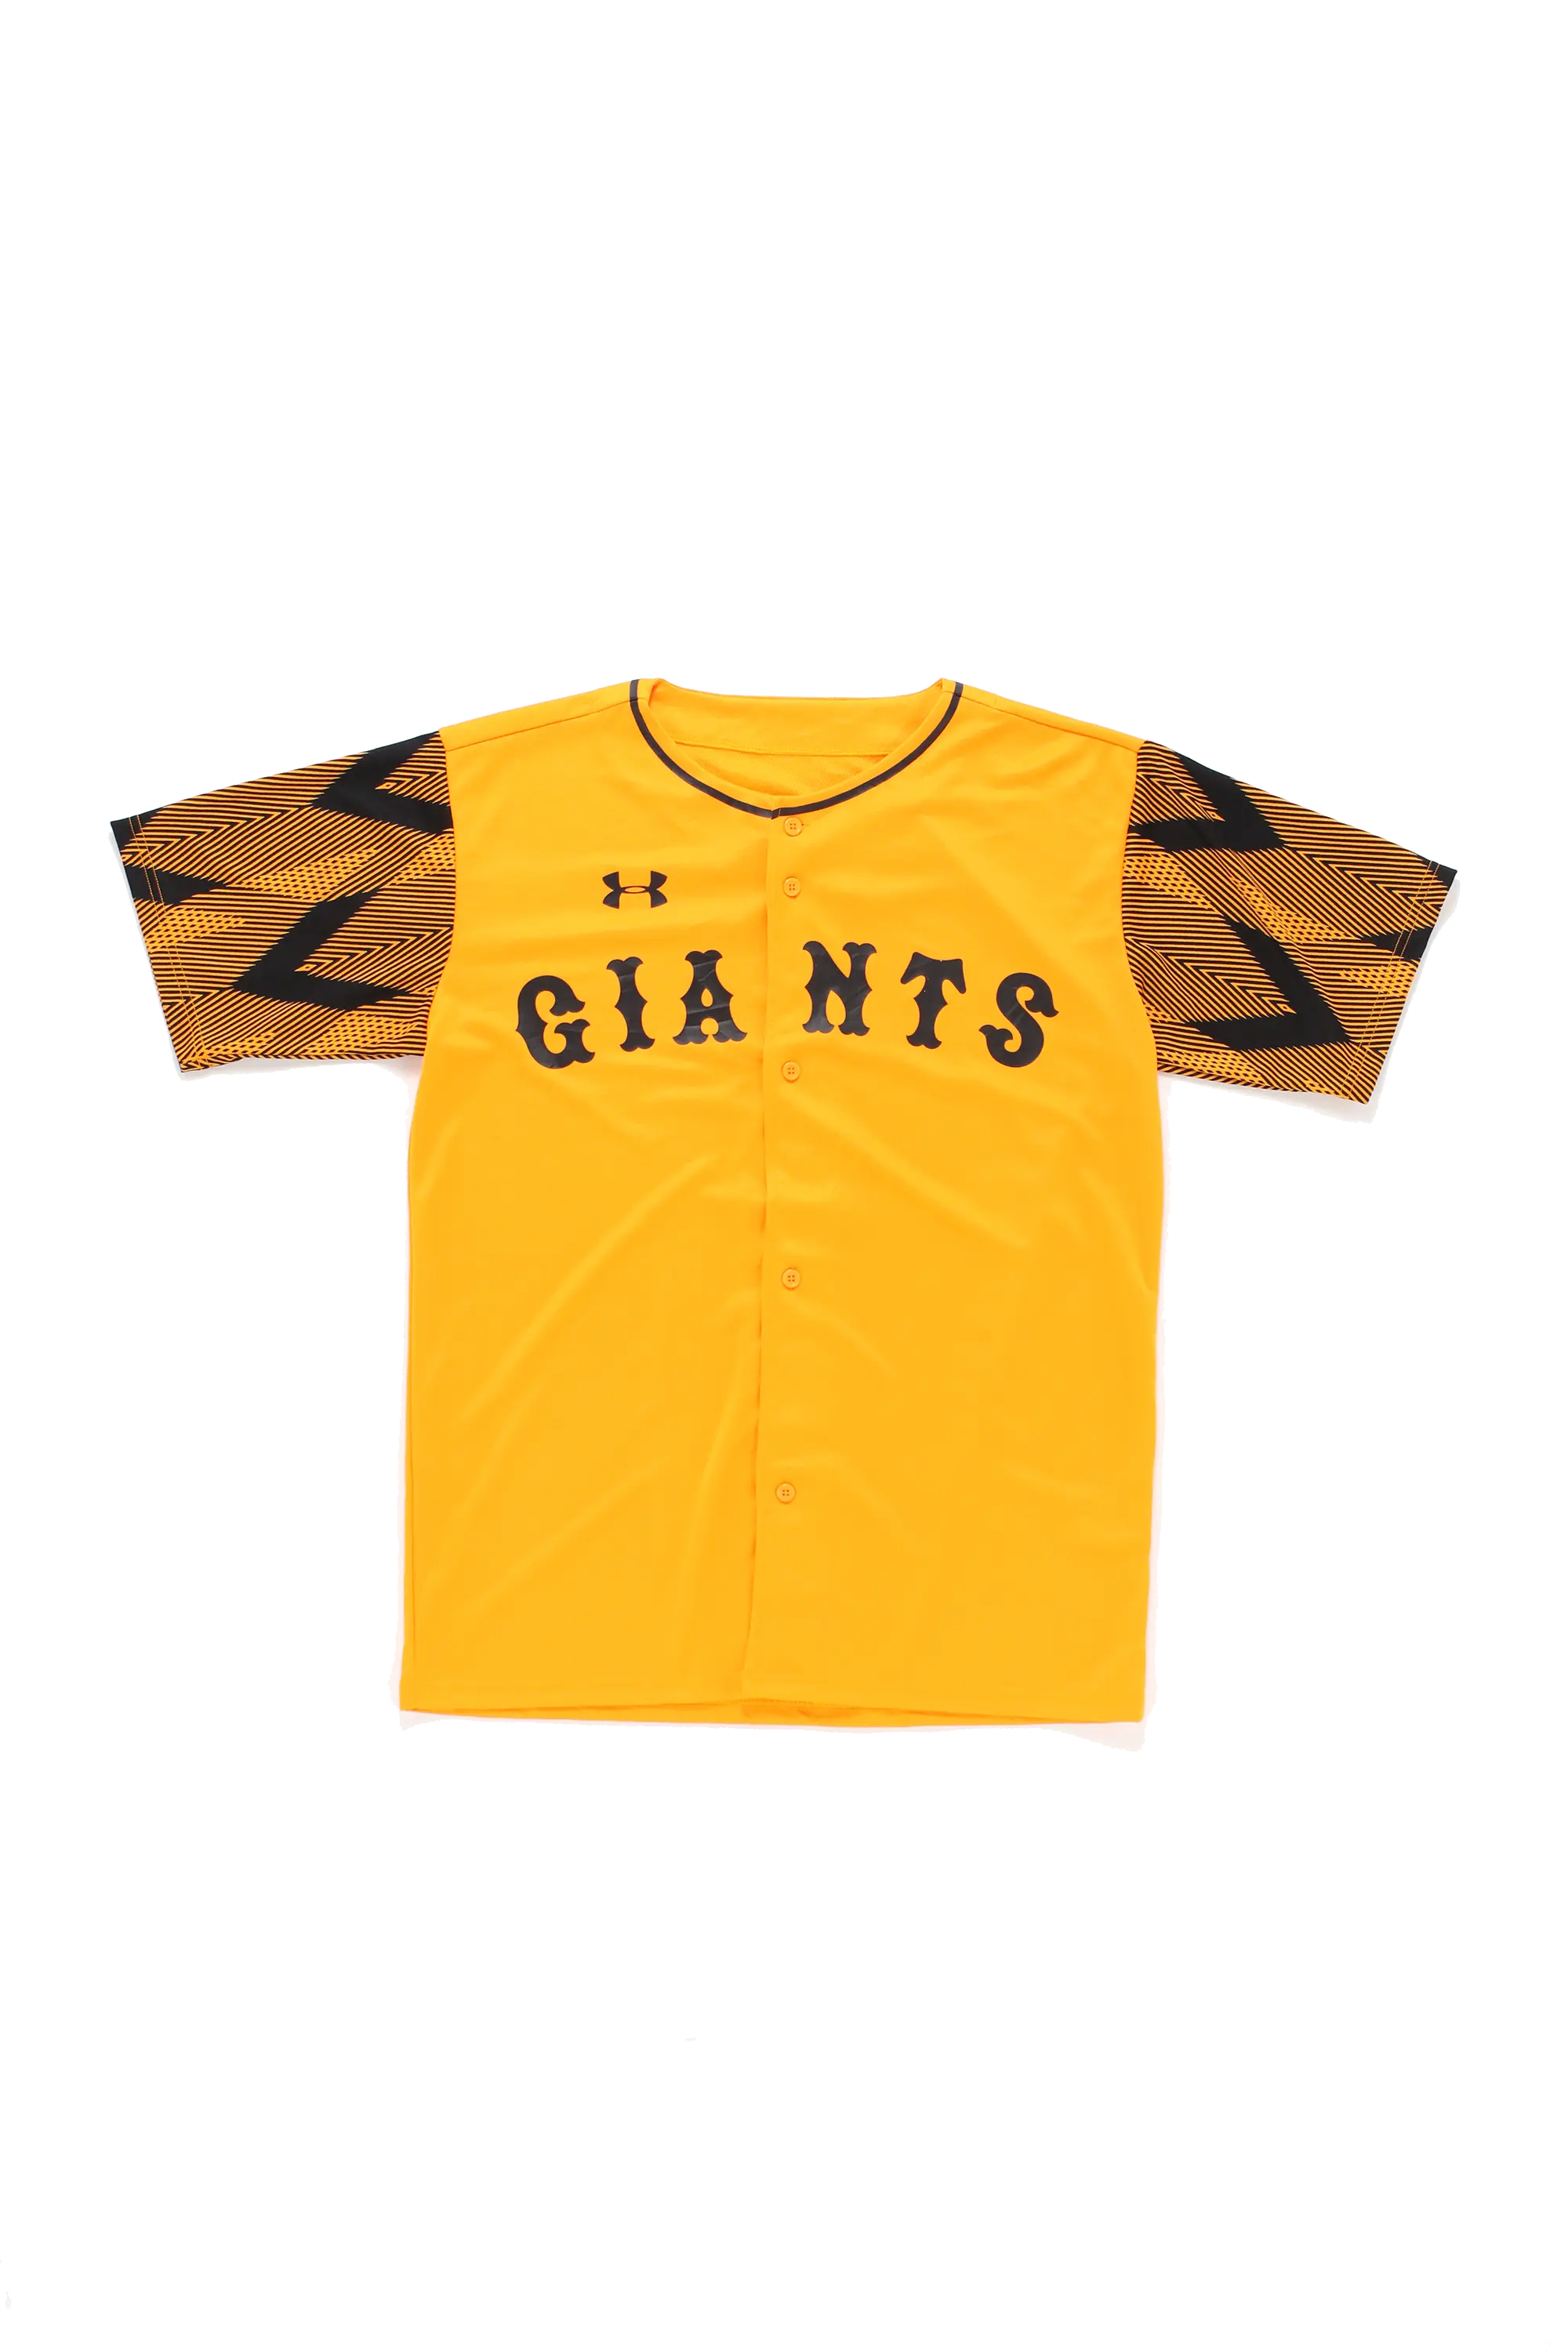 Under Armour Giants Jersey